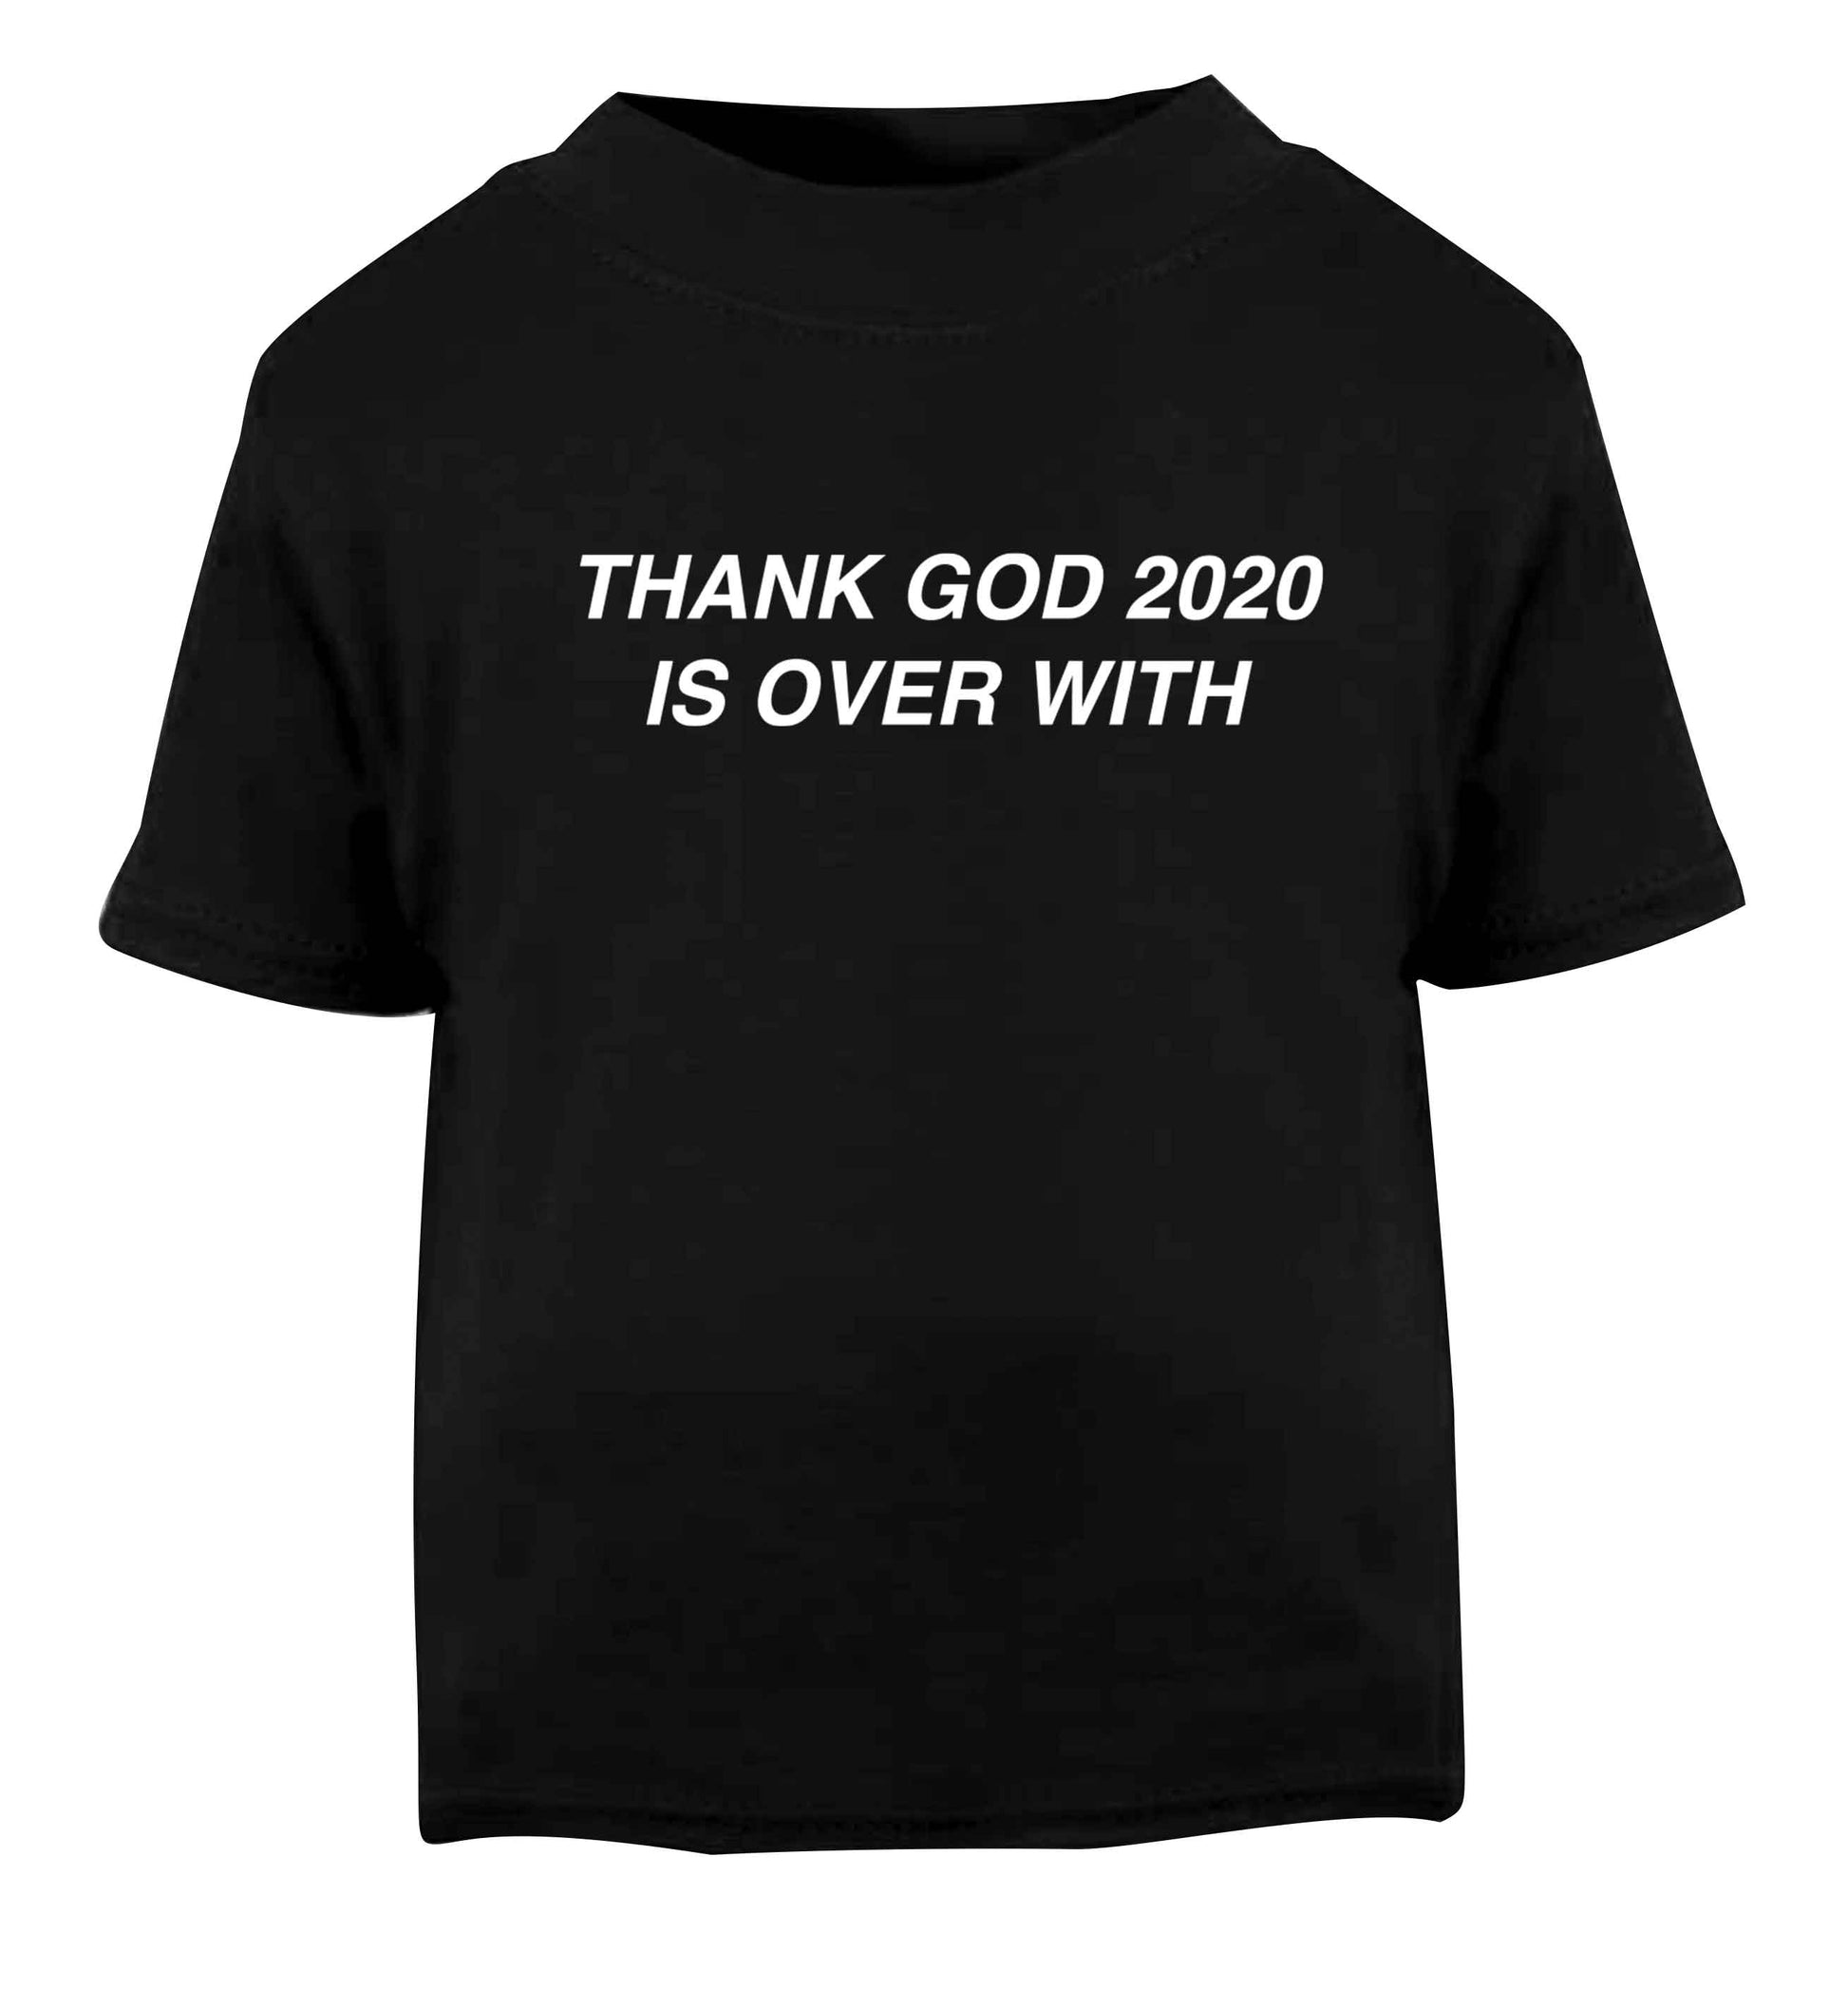 Thank god 2020 is over with Black baby toddler Tshirt 2 years